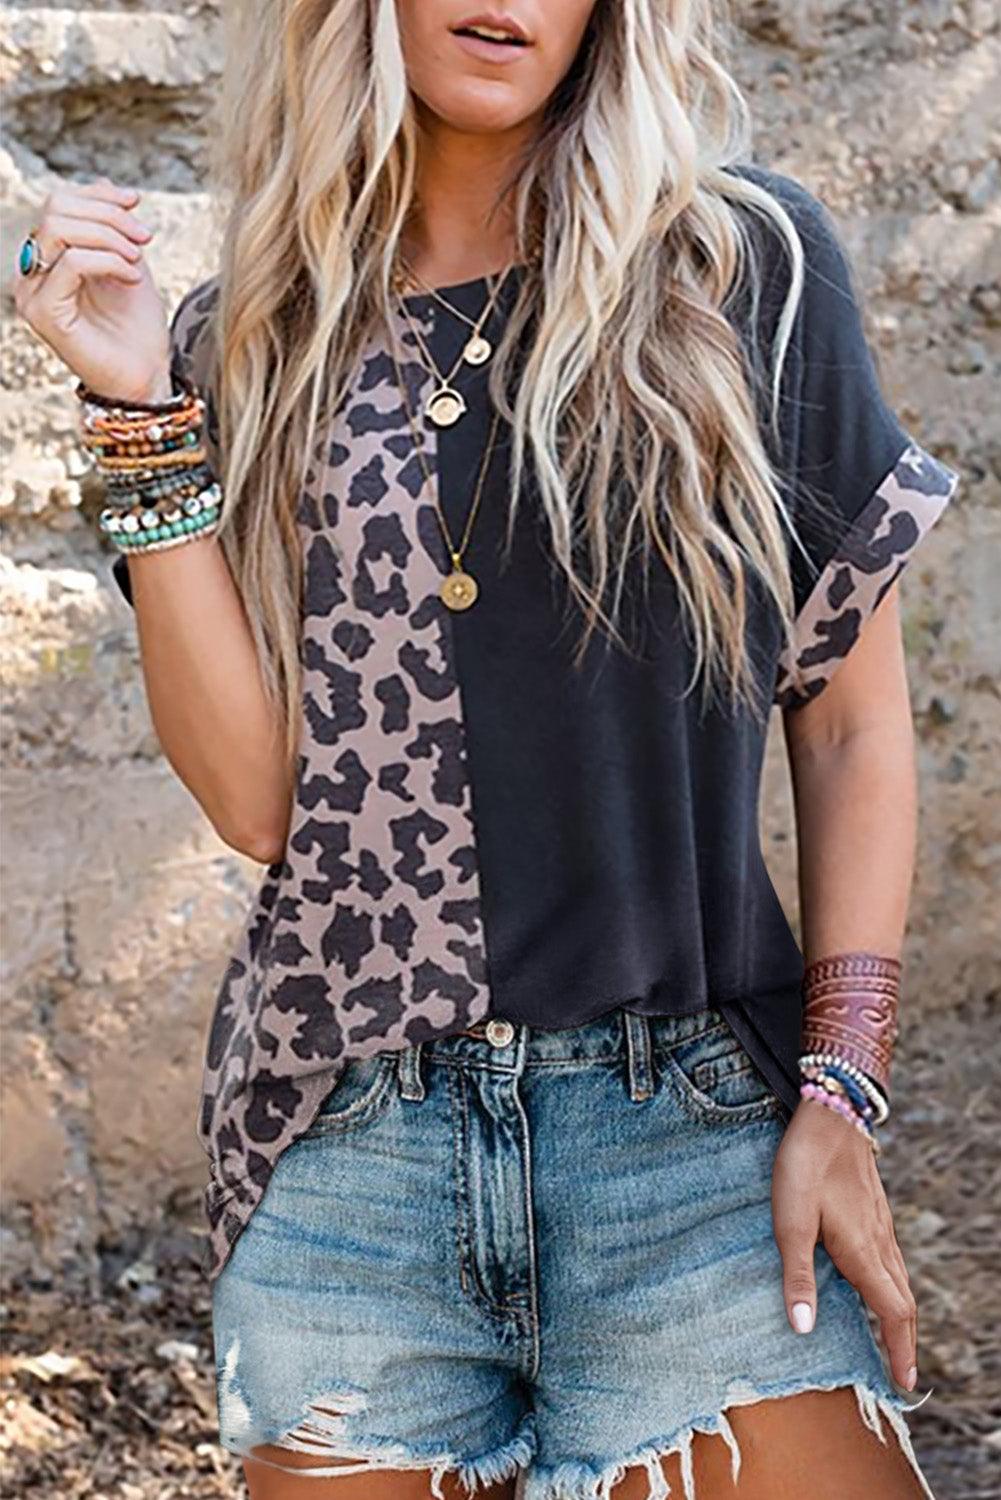 Black Leopard Print Color Block Rolled Up Sleeve Casual T Shirt